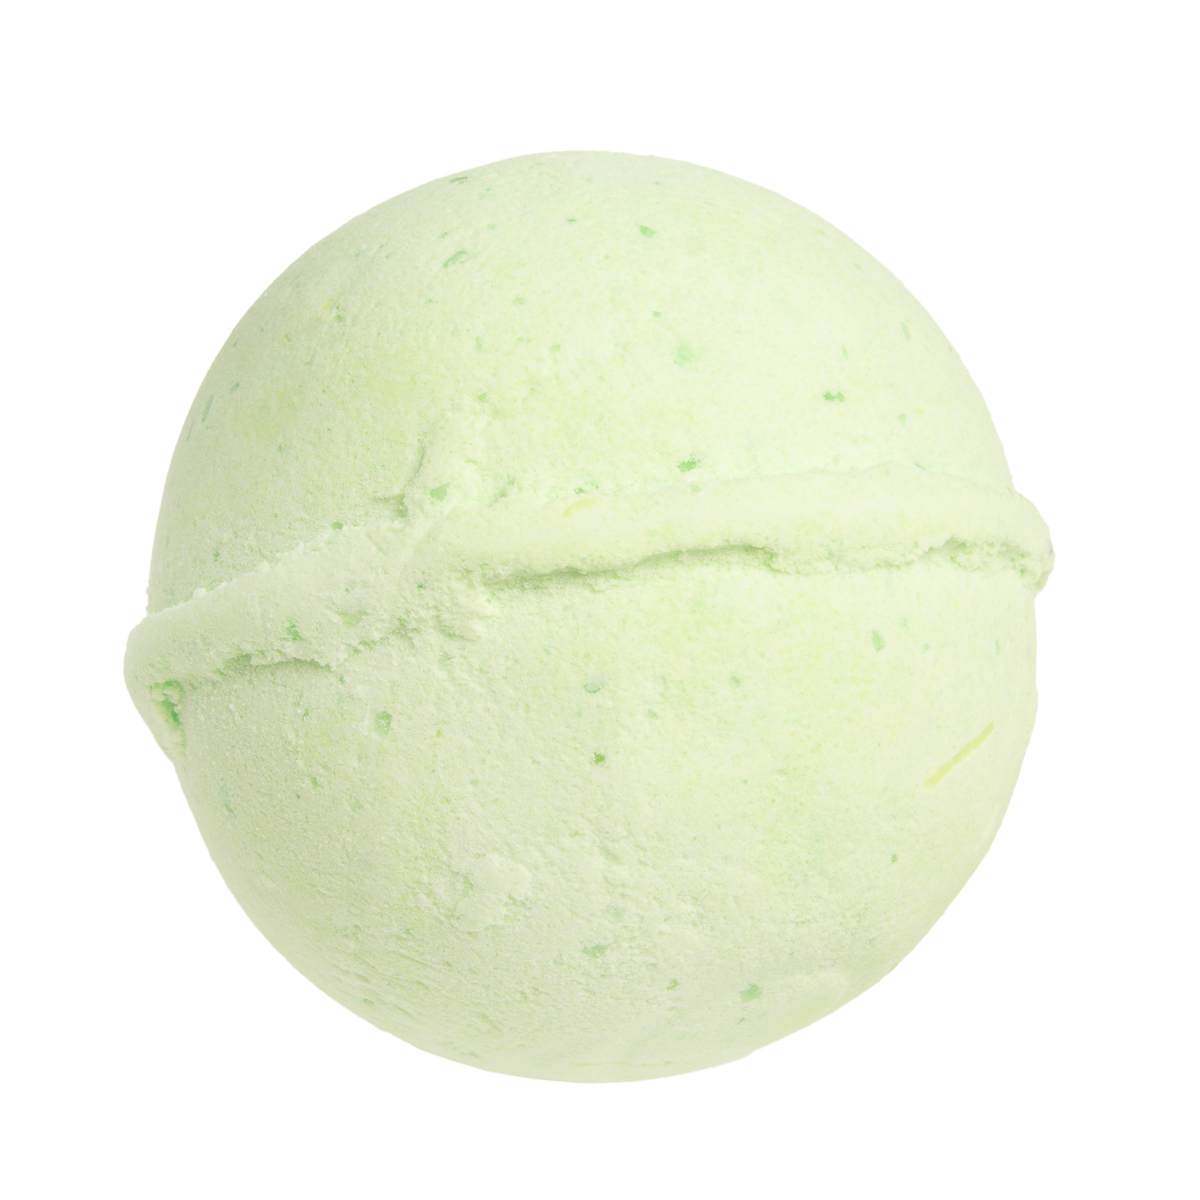 Seven Palms Spa Oasis Bath Bomb Natural Eucalyptus Oil Essential Oils Infused Bath Bombs For Women Individually Wrapped